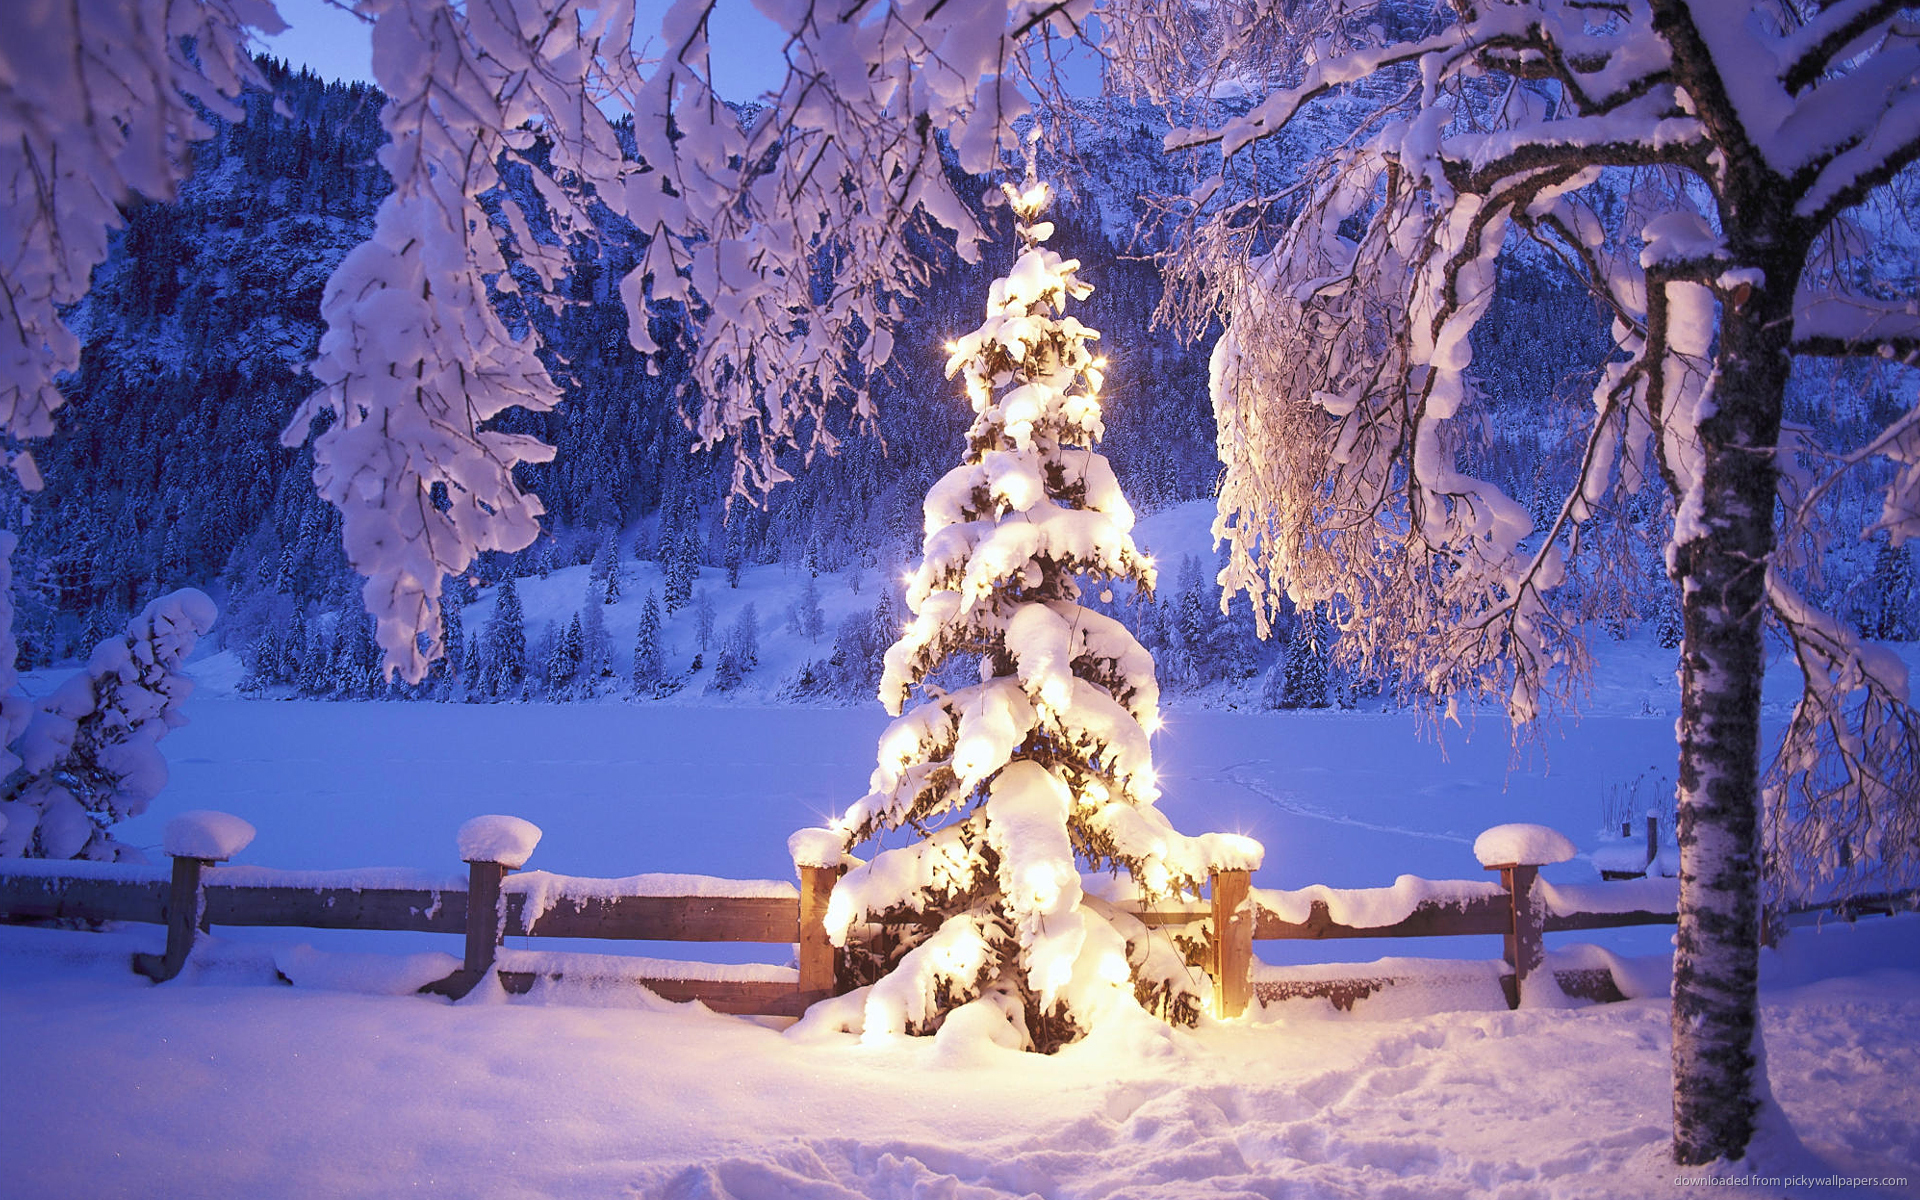 Download 1920x1200 Natural Christmas Tree In Snow Wallpaper